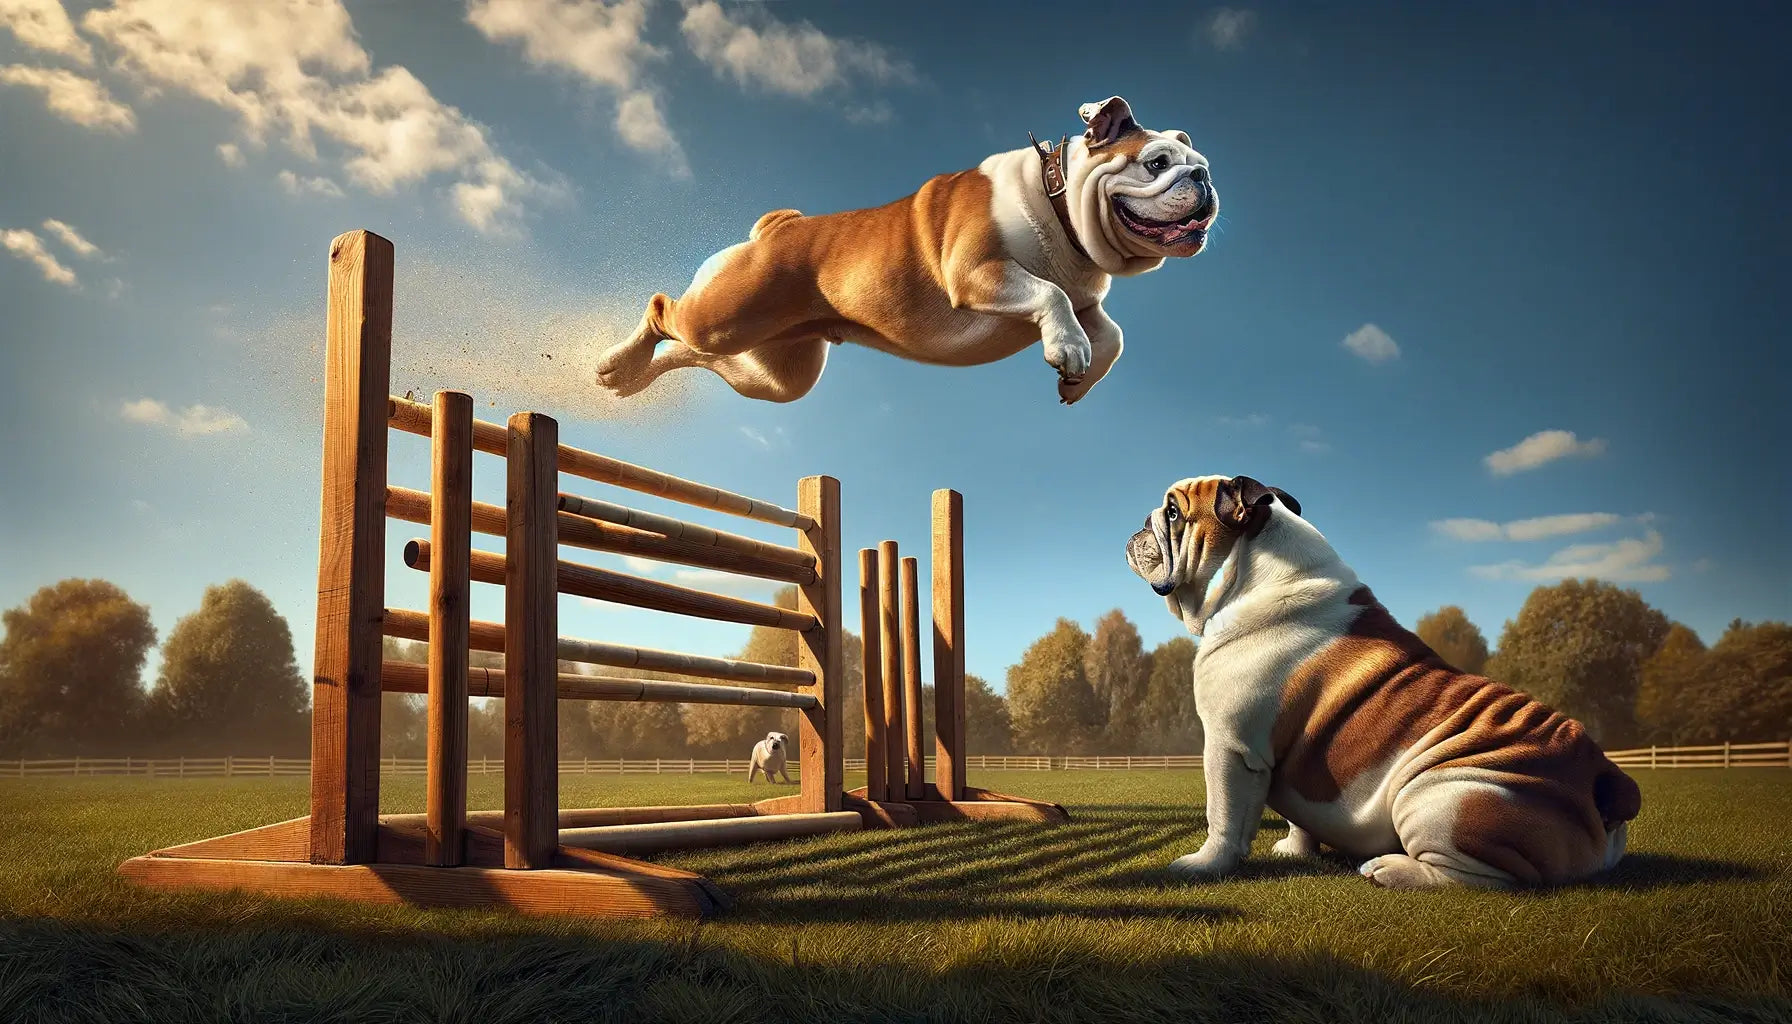 Image showcasing the agility difference between an Olde English Bulldogge and an English Bulldog in an outdoor scene.